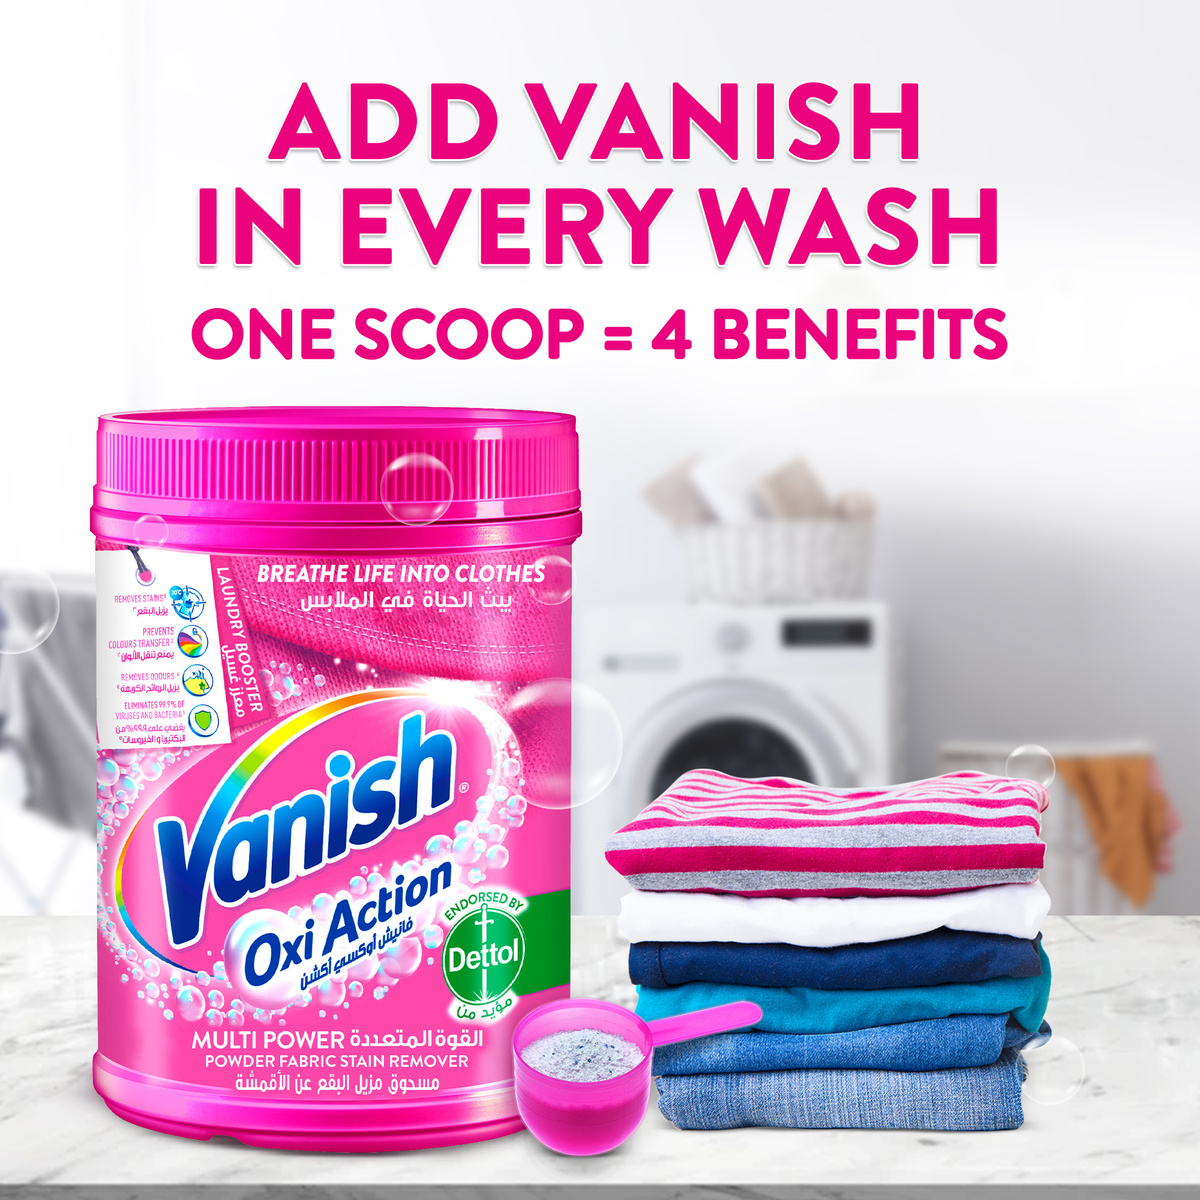 Vanish Oxi Action Fabric Stain Remover Pink 500 g + White 450 g